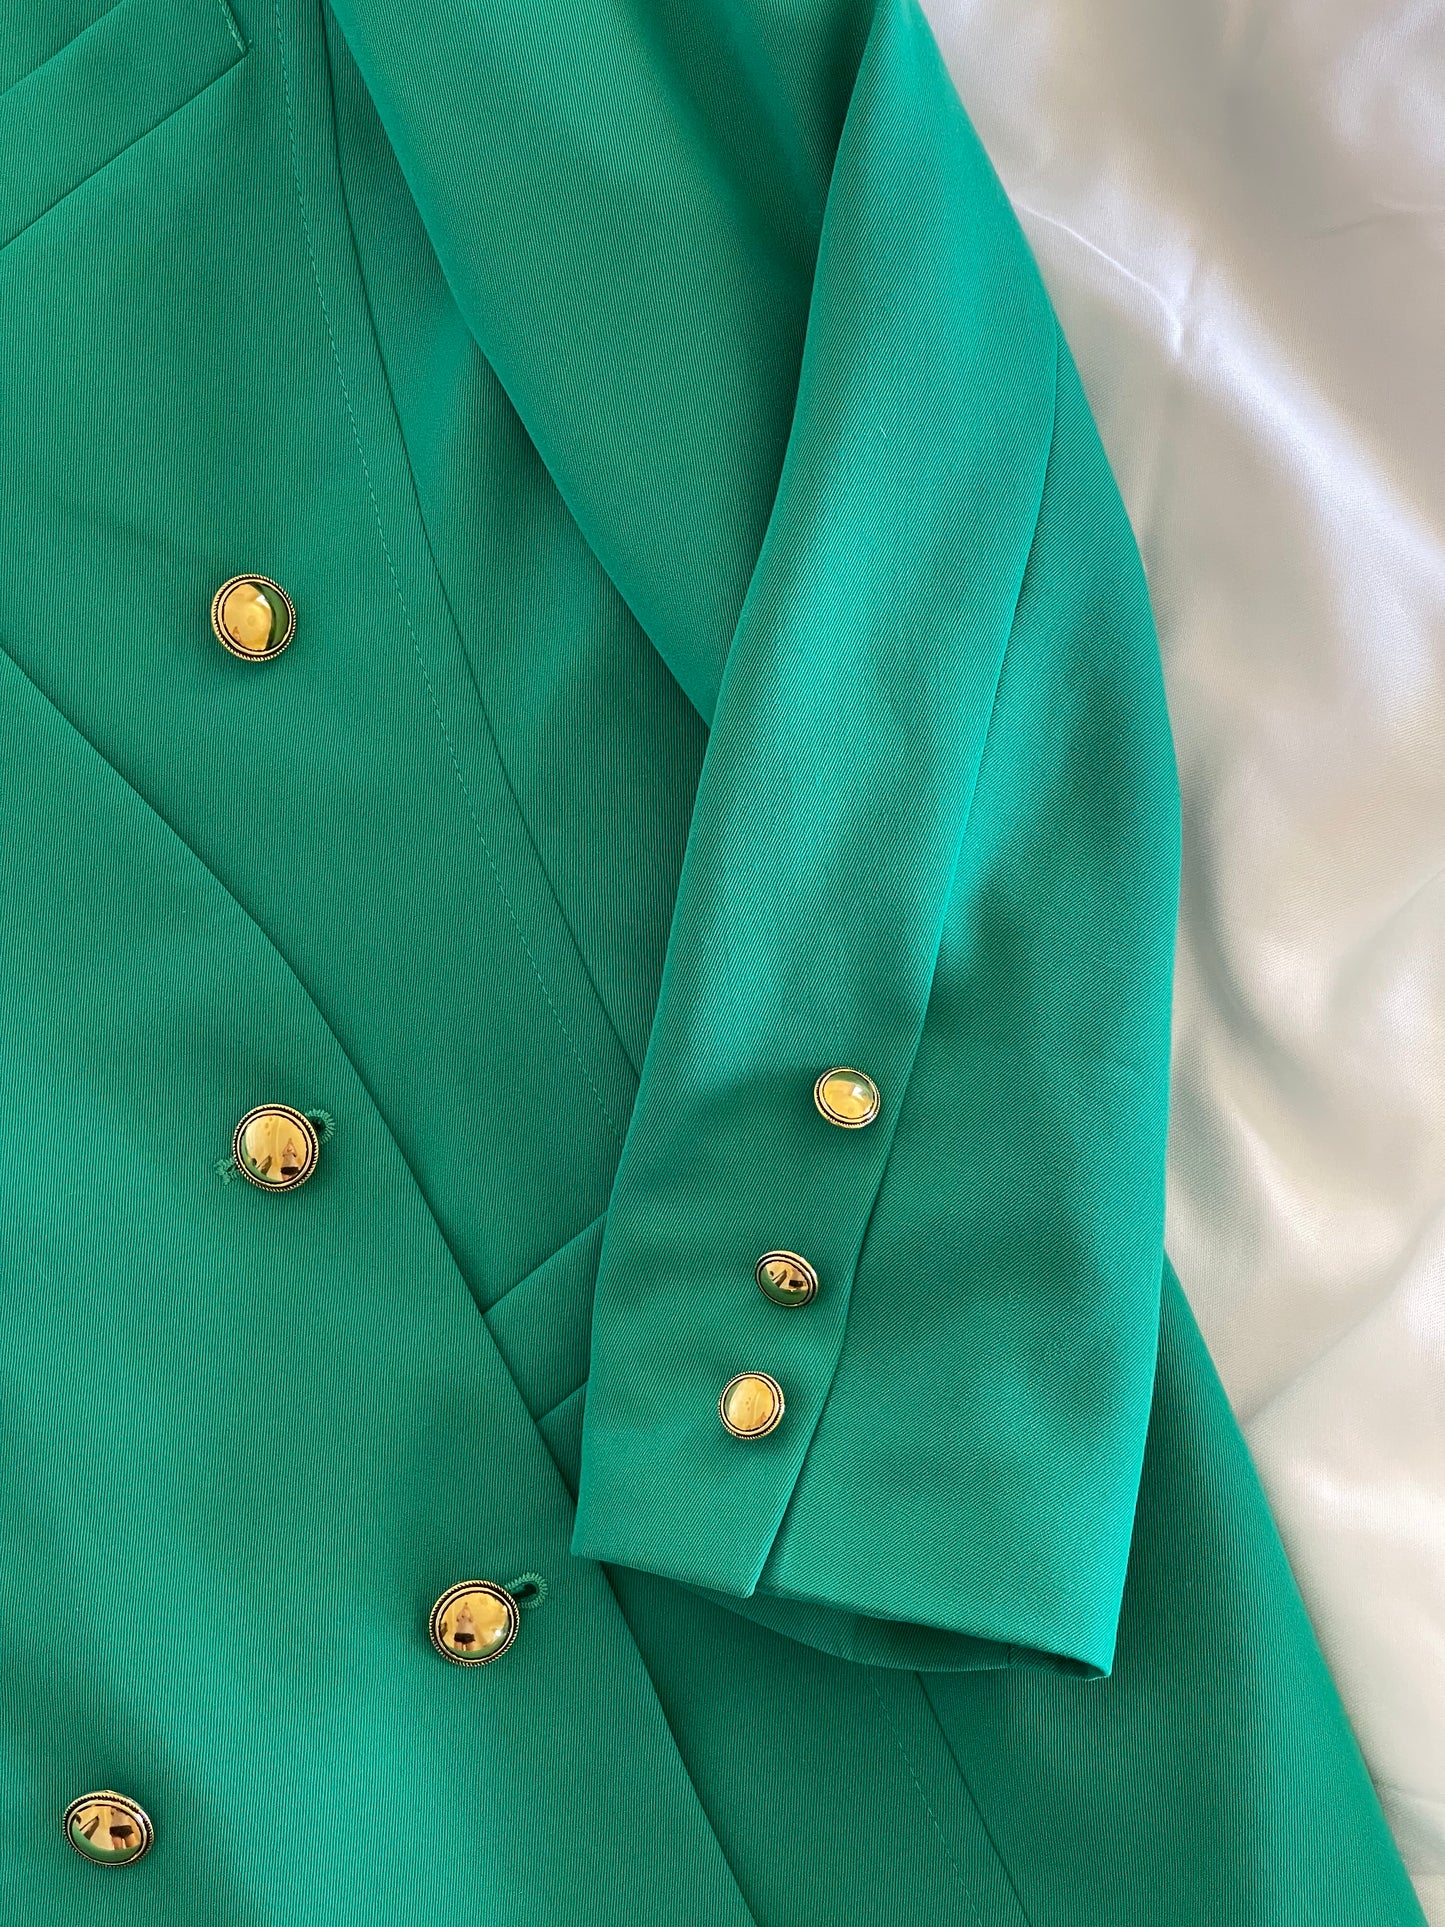 Astonishing vintage lapelless blazer in an emerald green color